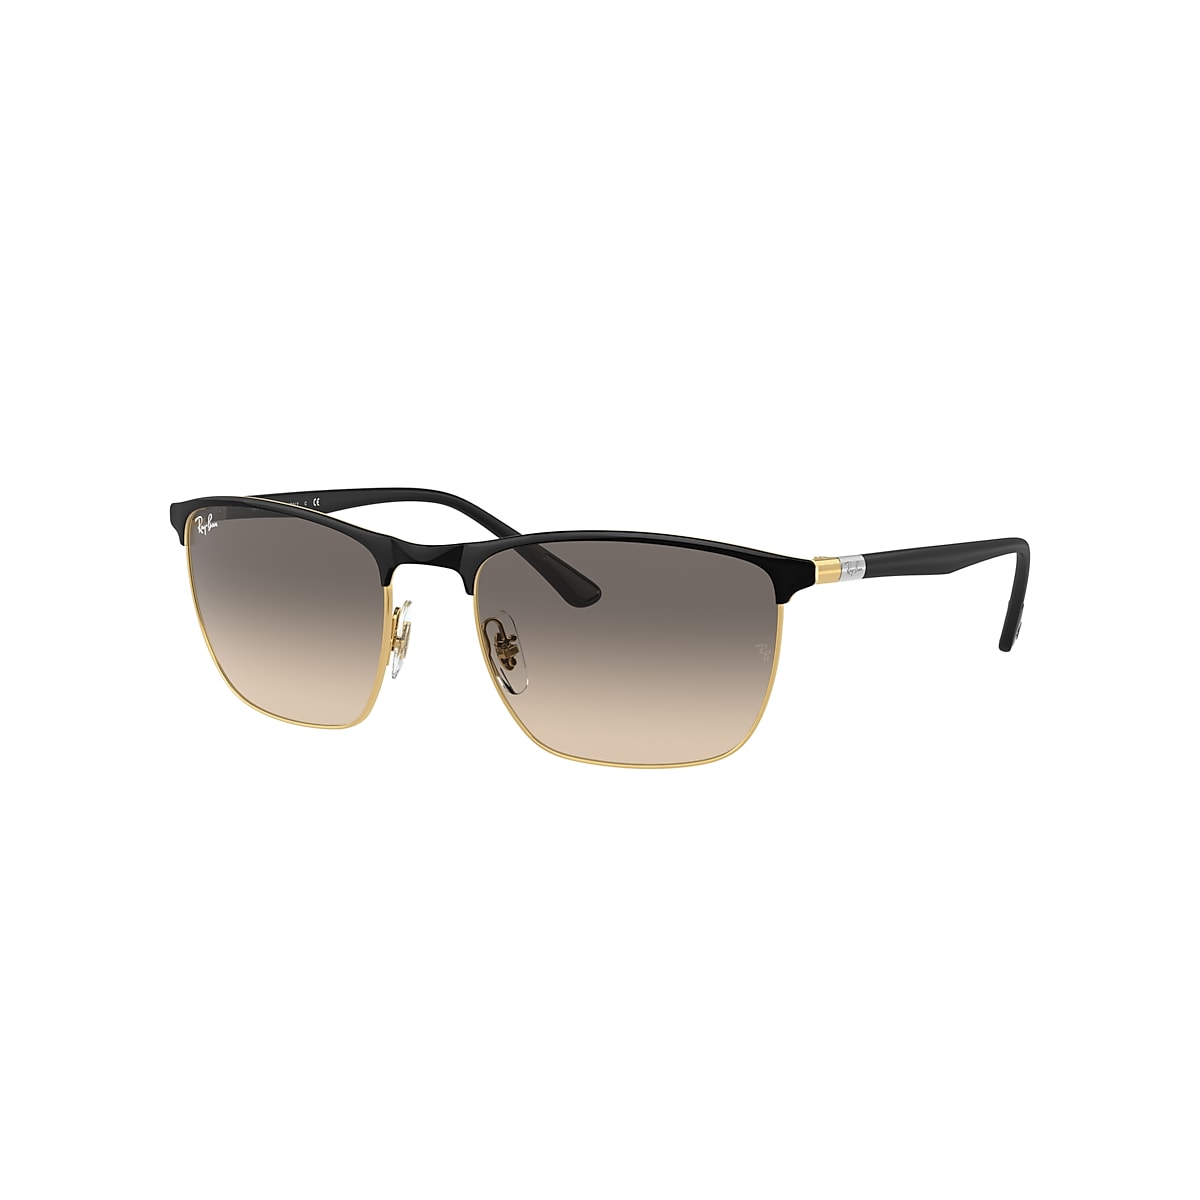 RB3686 Sunglasses in Black On Gold and Grey - RB3686 | Ray-Ban® US